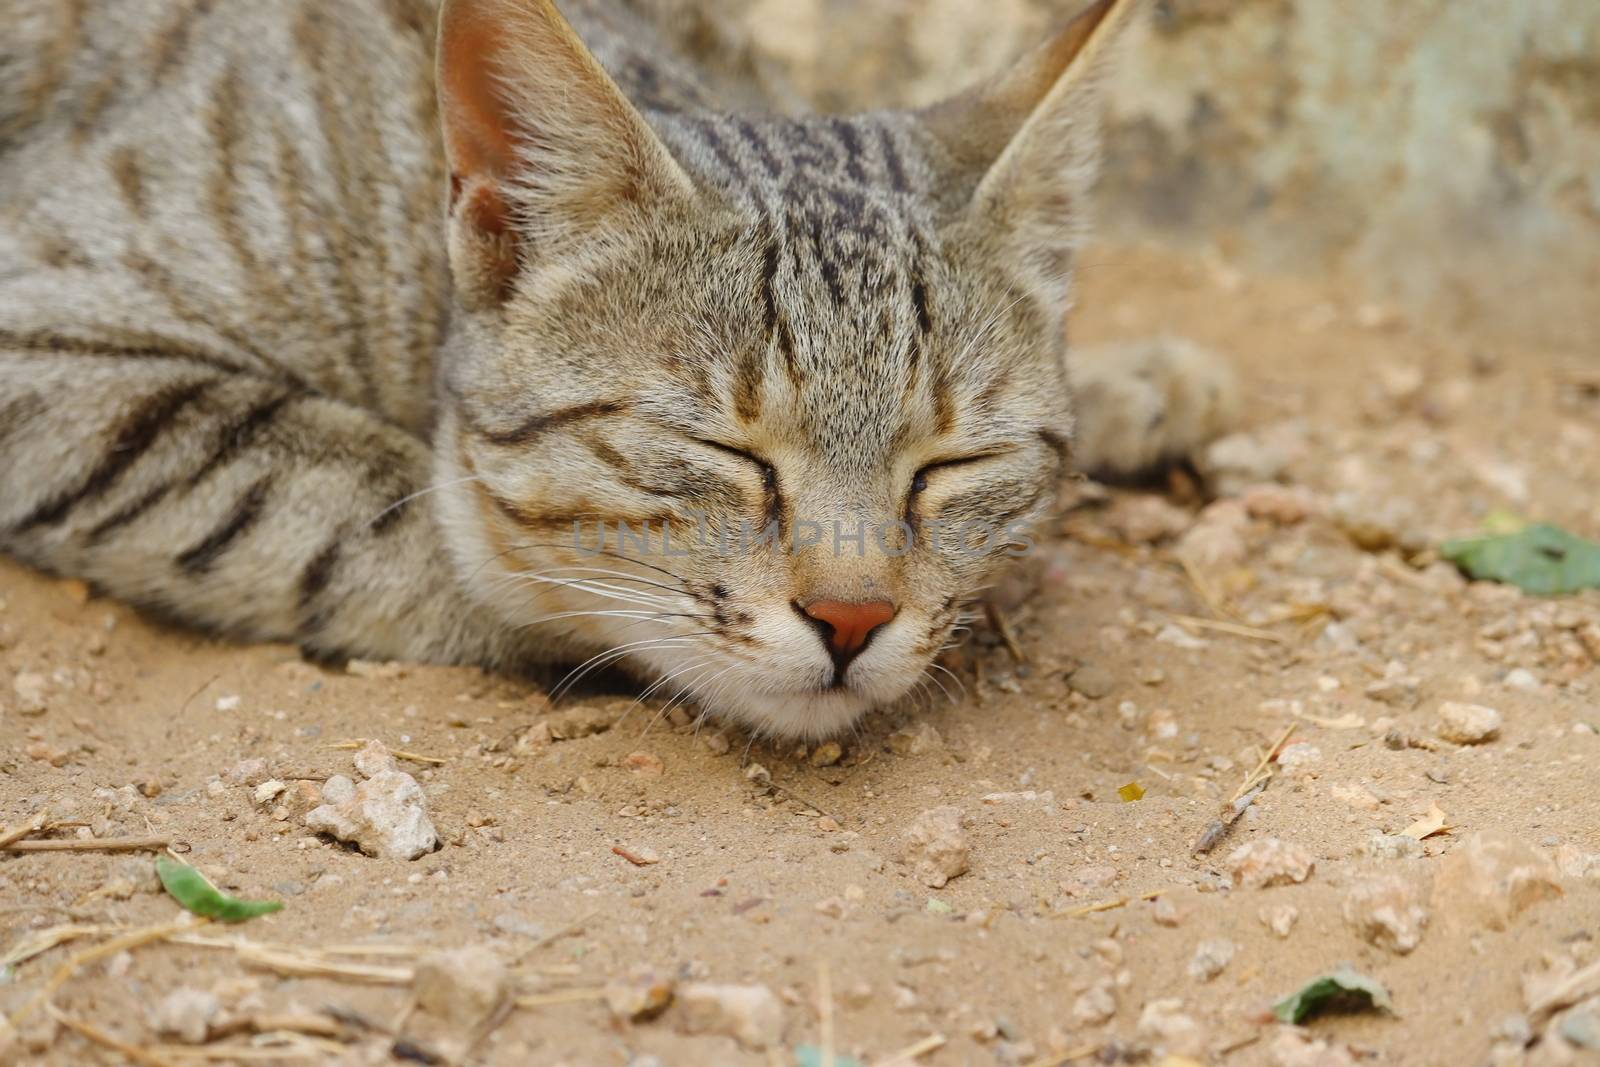 A cat sleeping on the ground with eyes closed by 9500102400